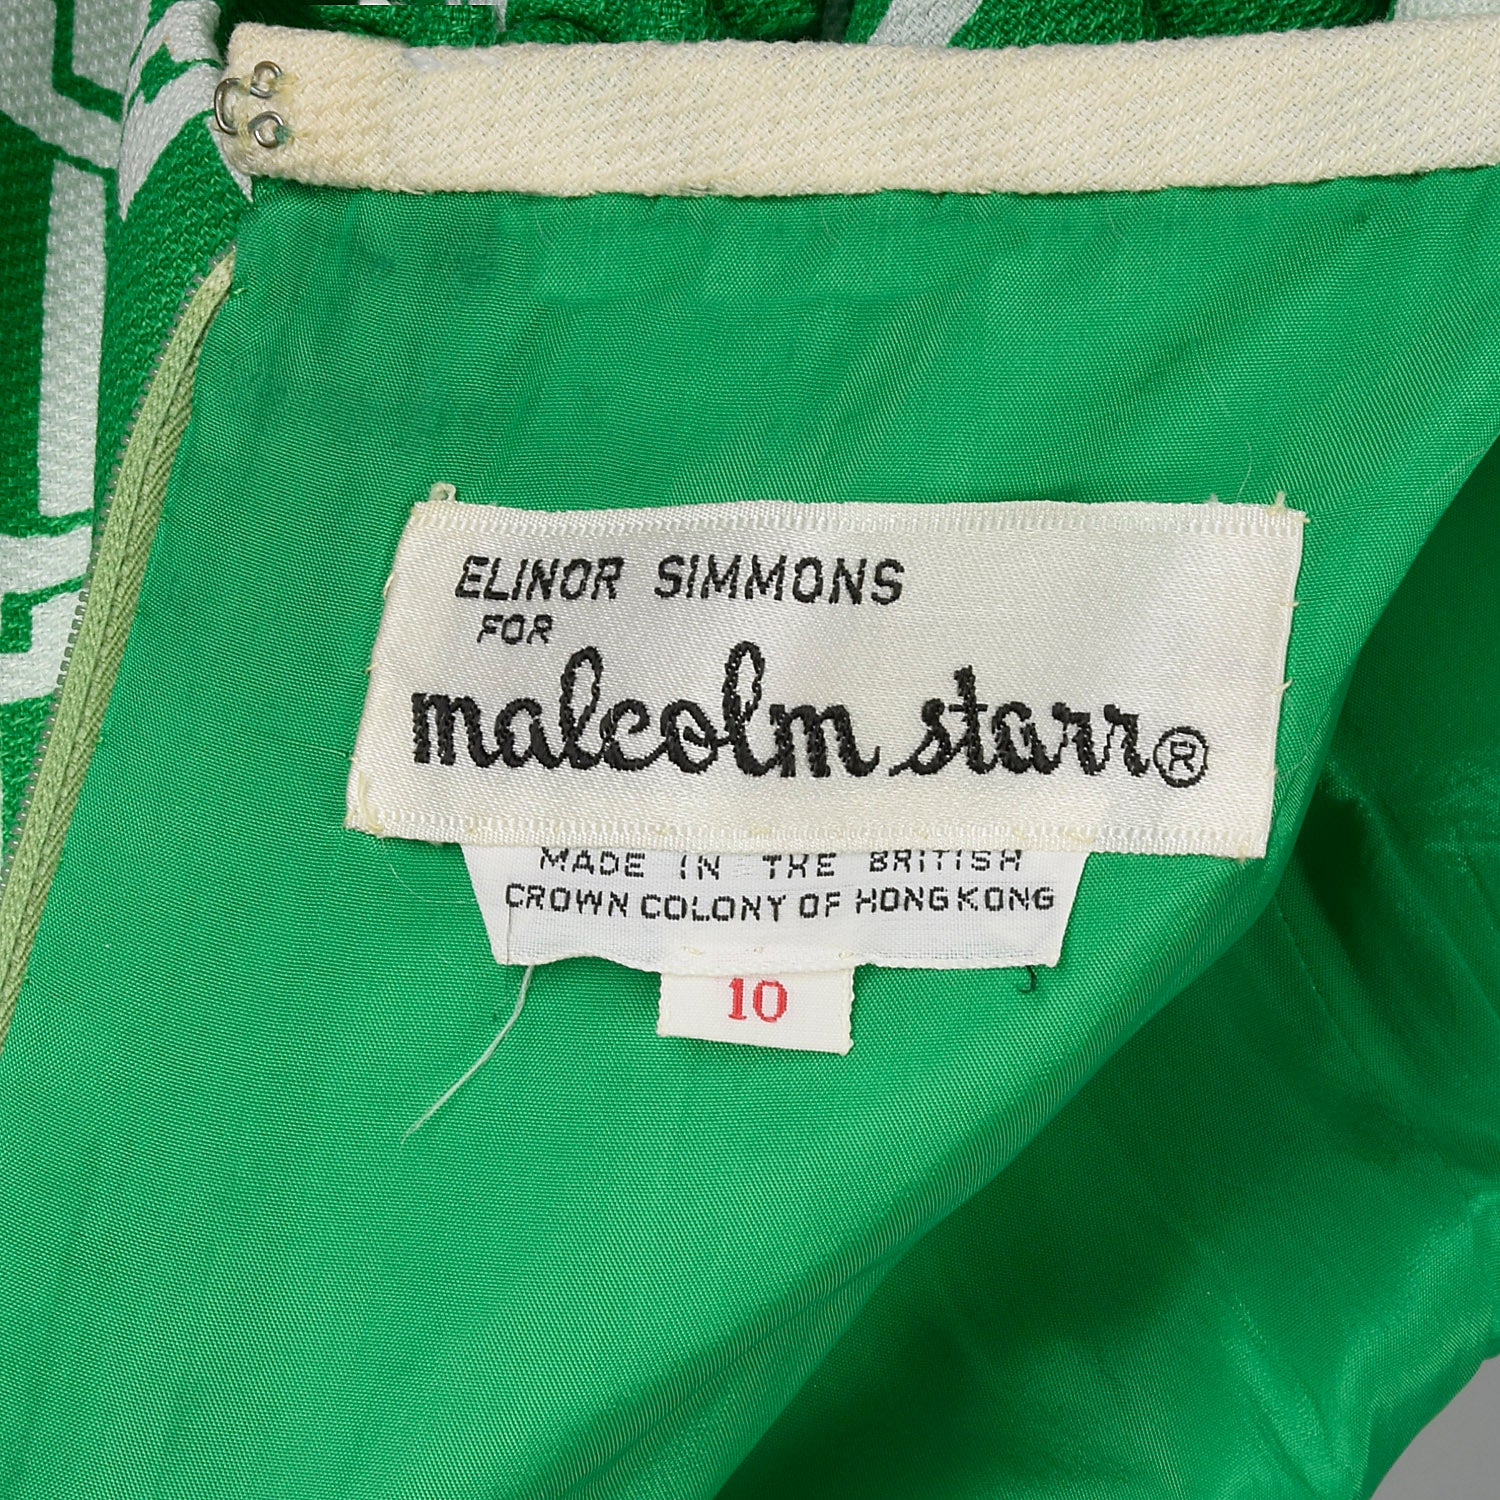 Small Malcolm Star 1960s Green and White Dress